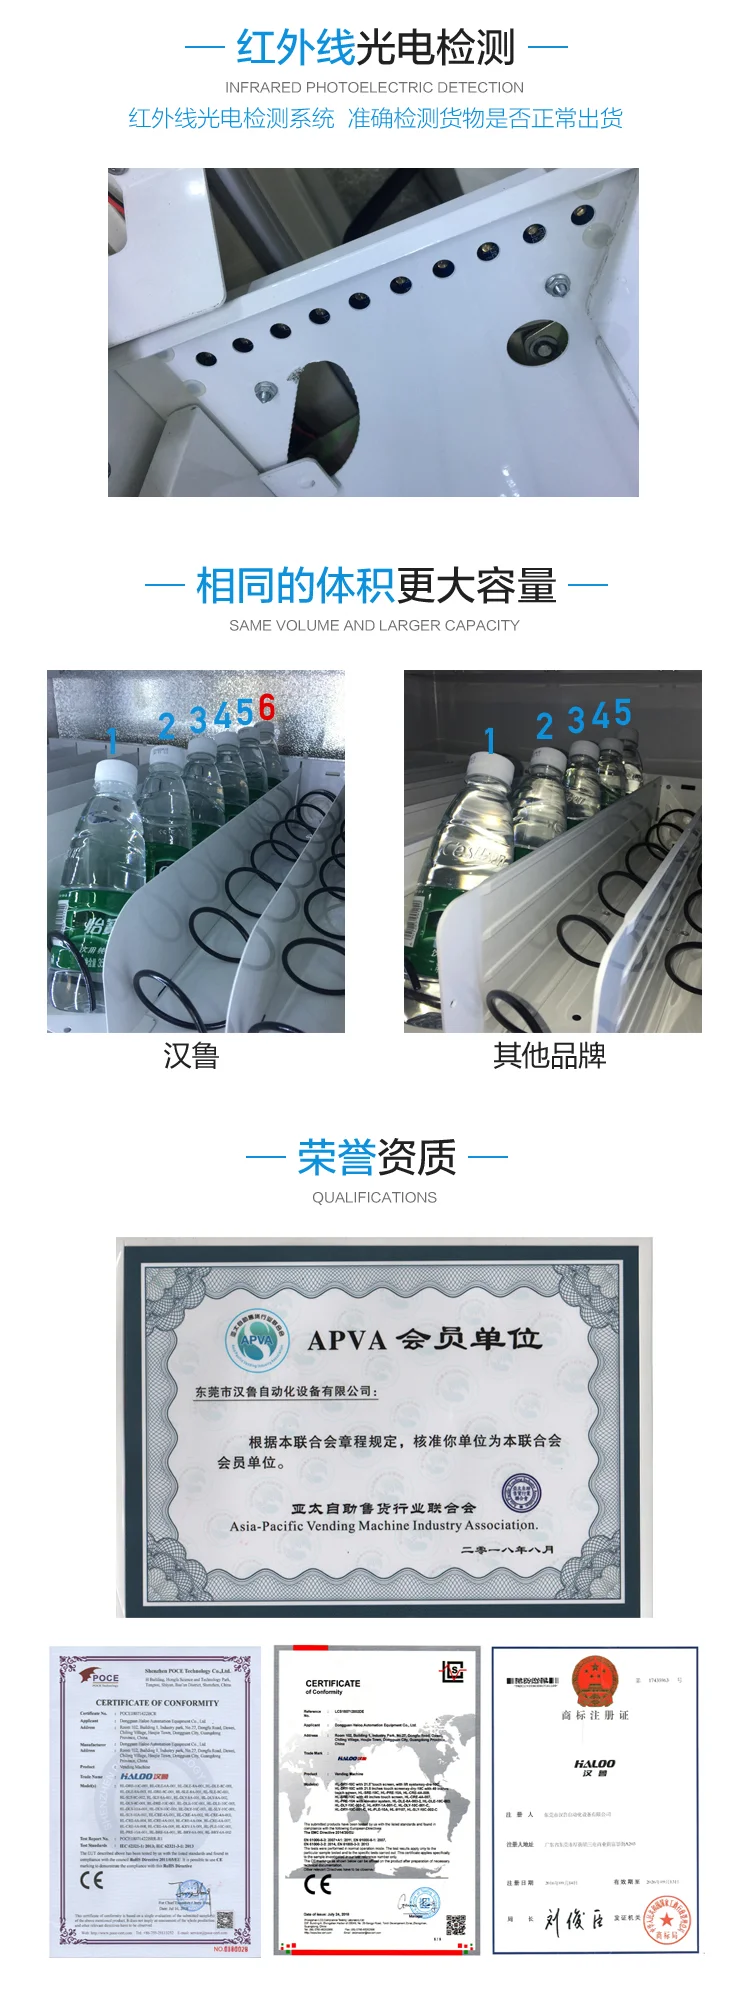 convenient personalised vending machine factory for food